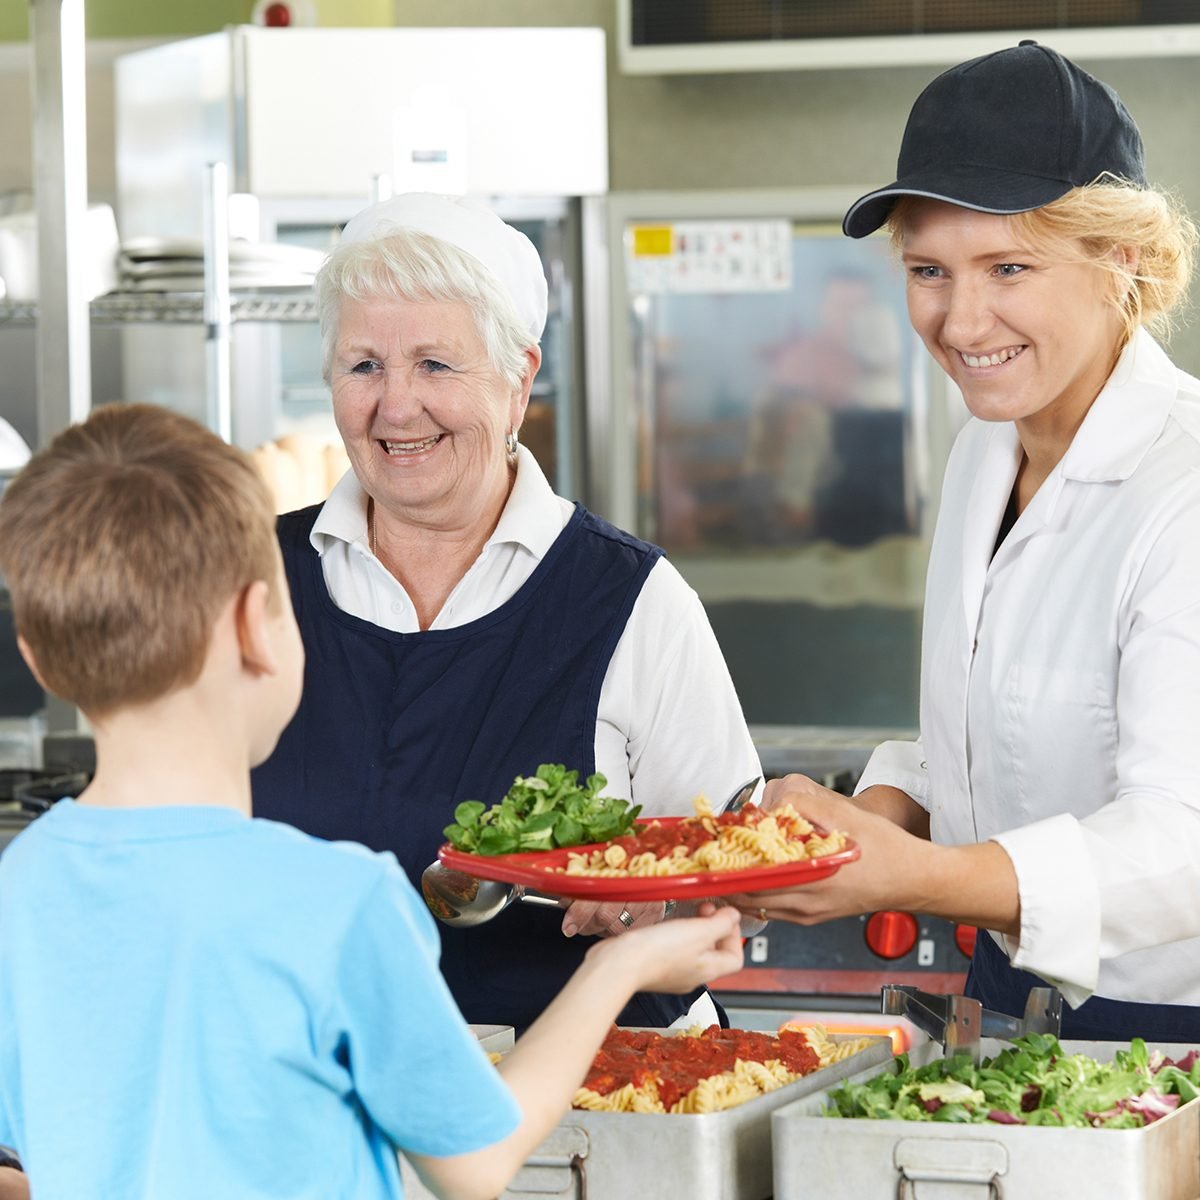 Placing local food on school lunch trays